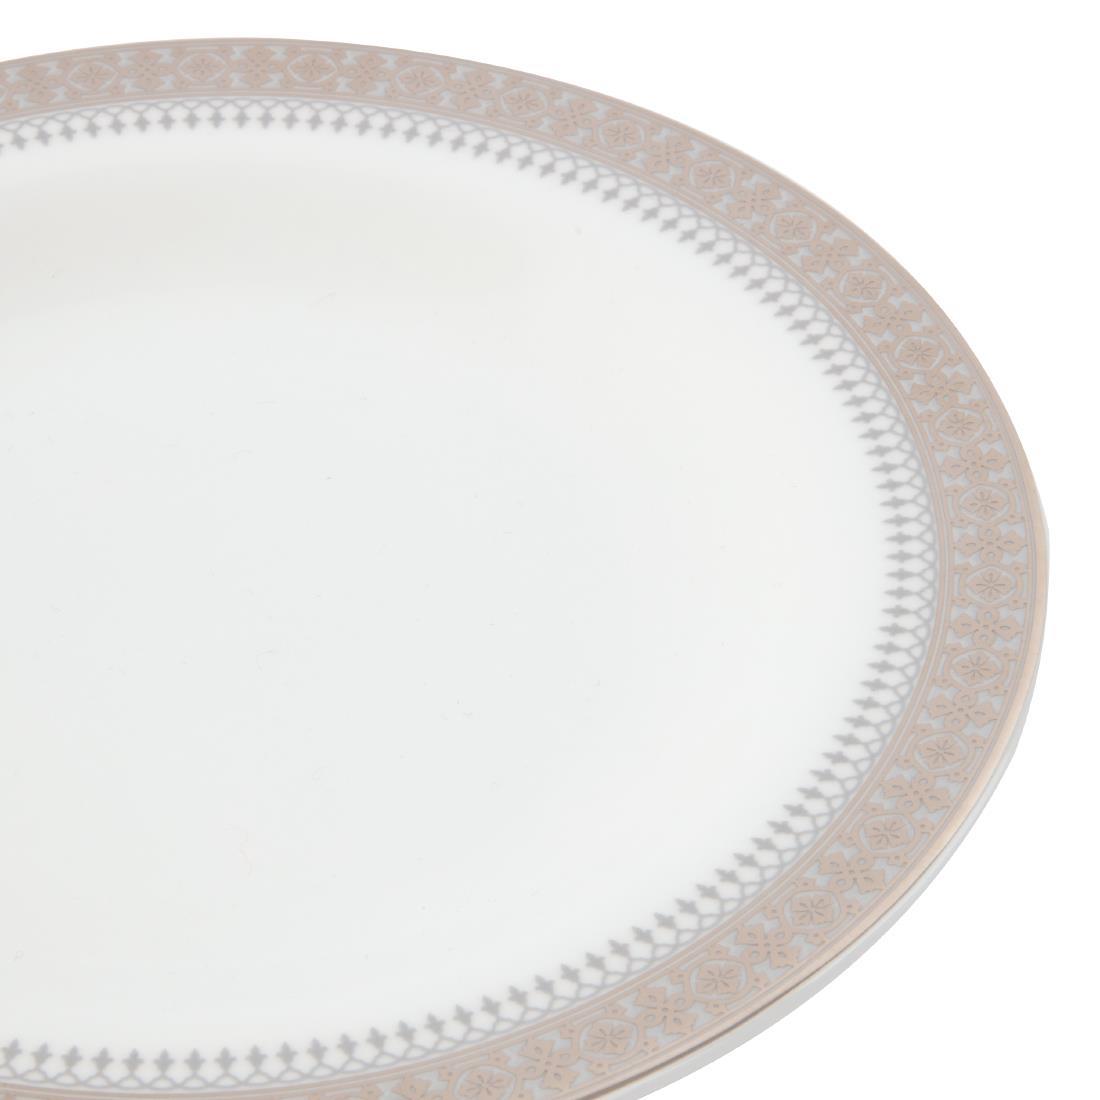 Royal Bone Afternoon Tea Couronne Plate 165mm (Pack of 12) - FB742  - 2